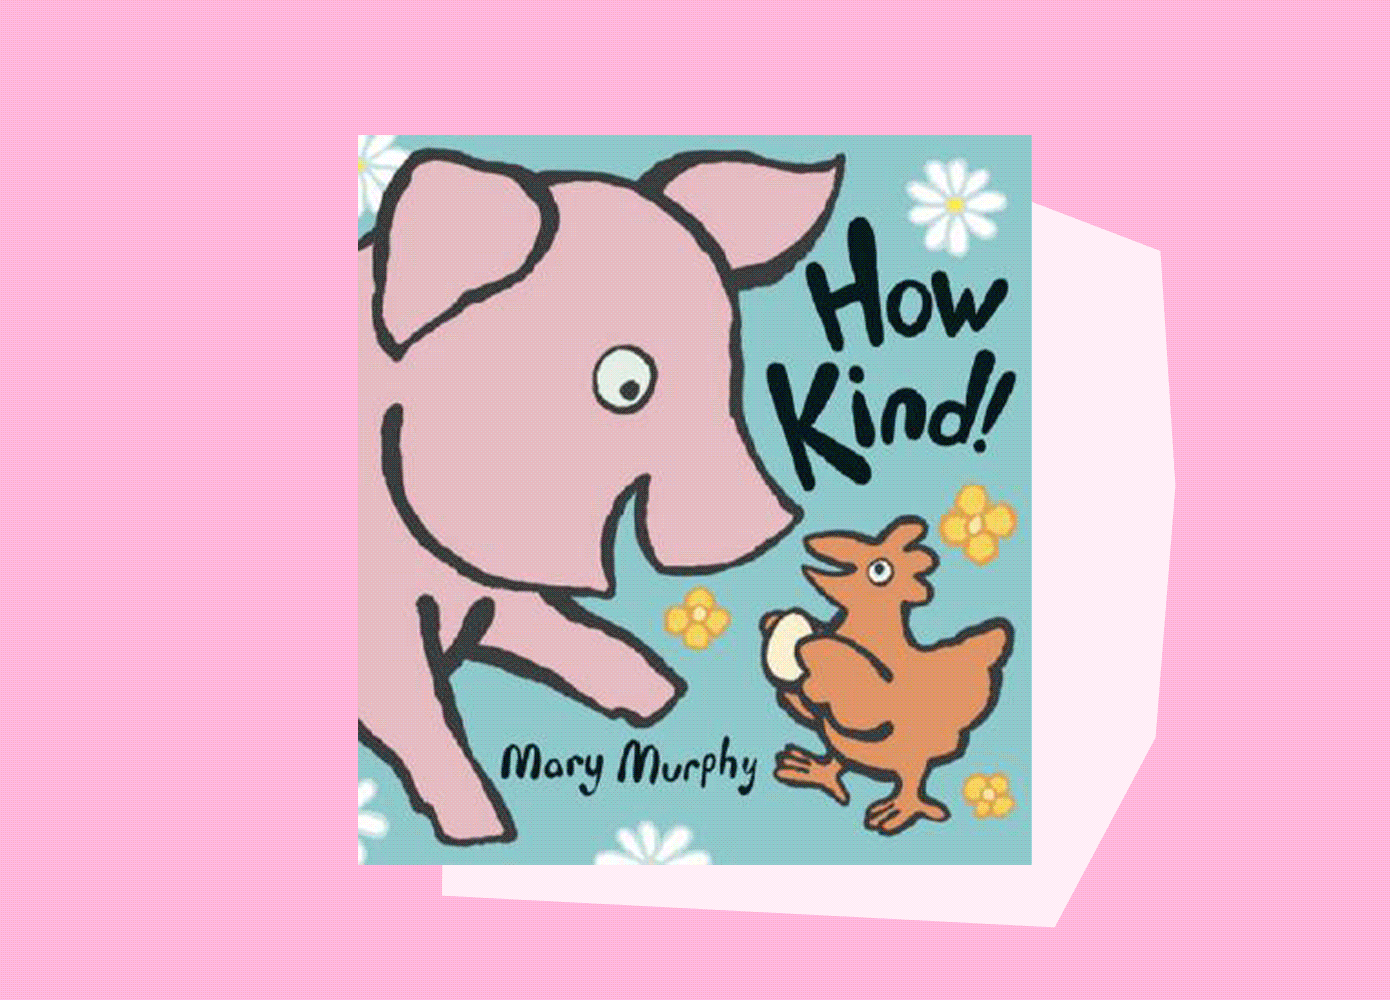 covers of many books about kindness